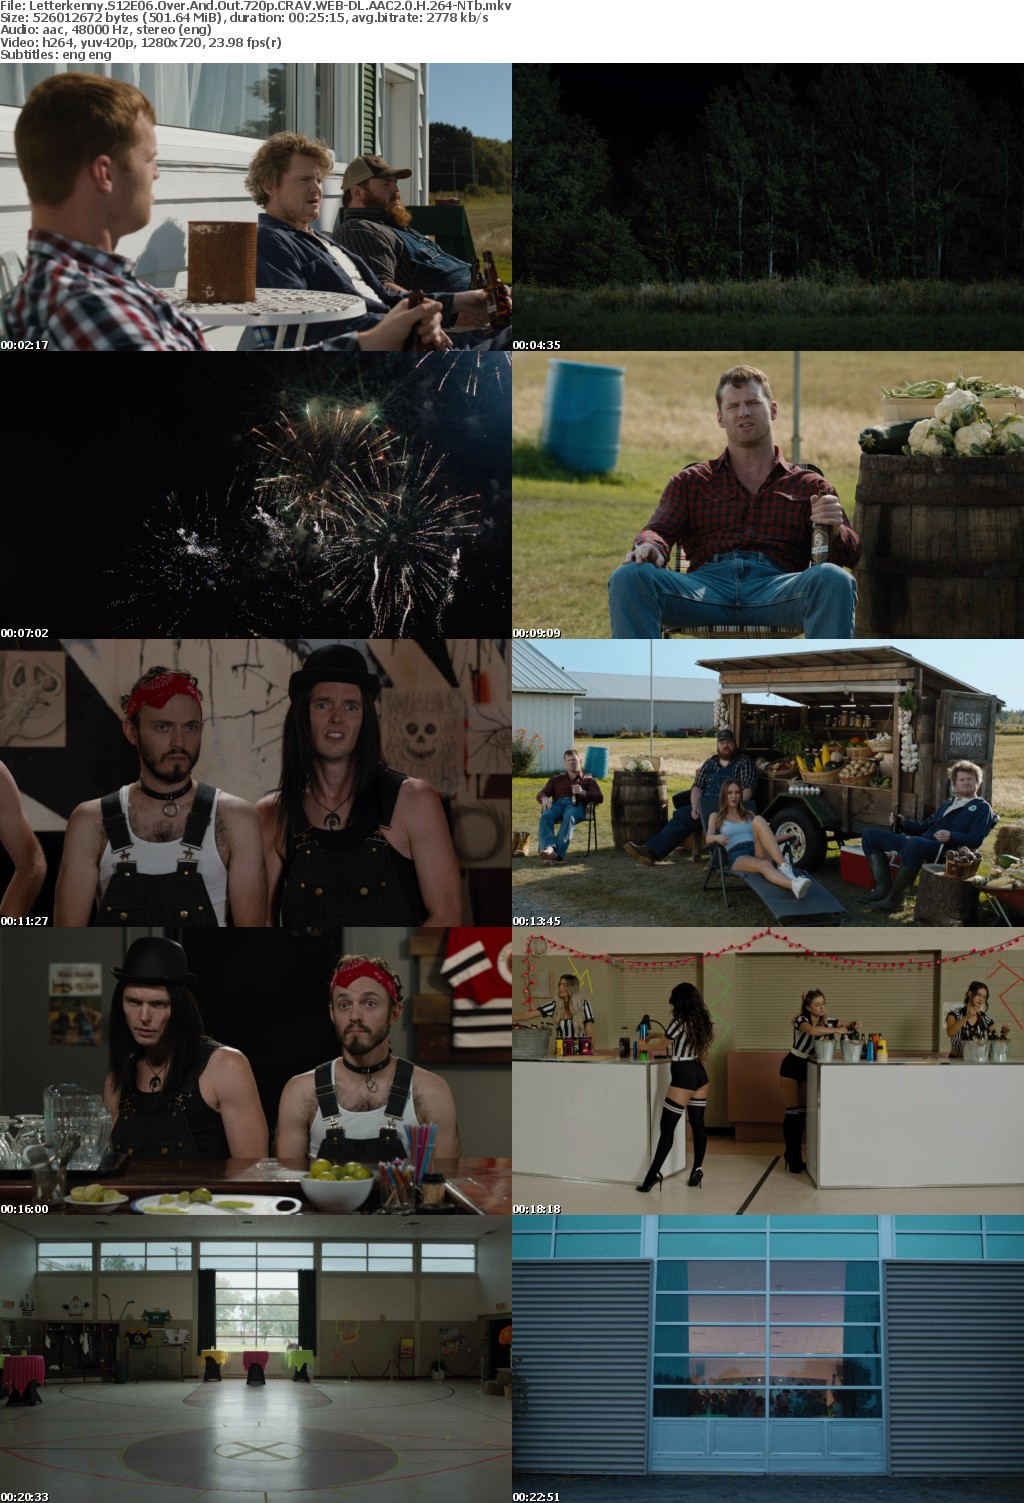 Letterkenny S12E06 Over And Out 720p CRAV WEB-DL AAC2 0 H 264-NTb